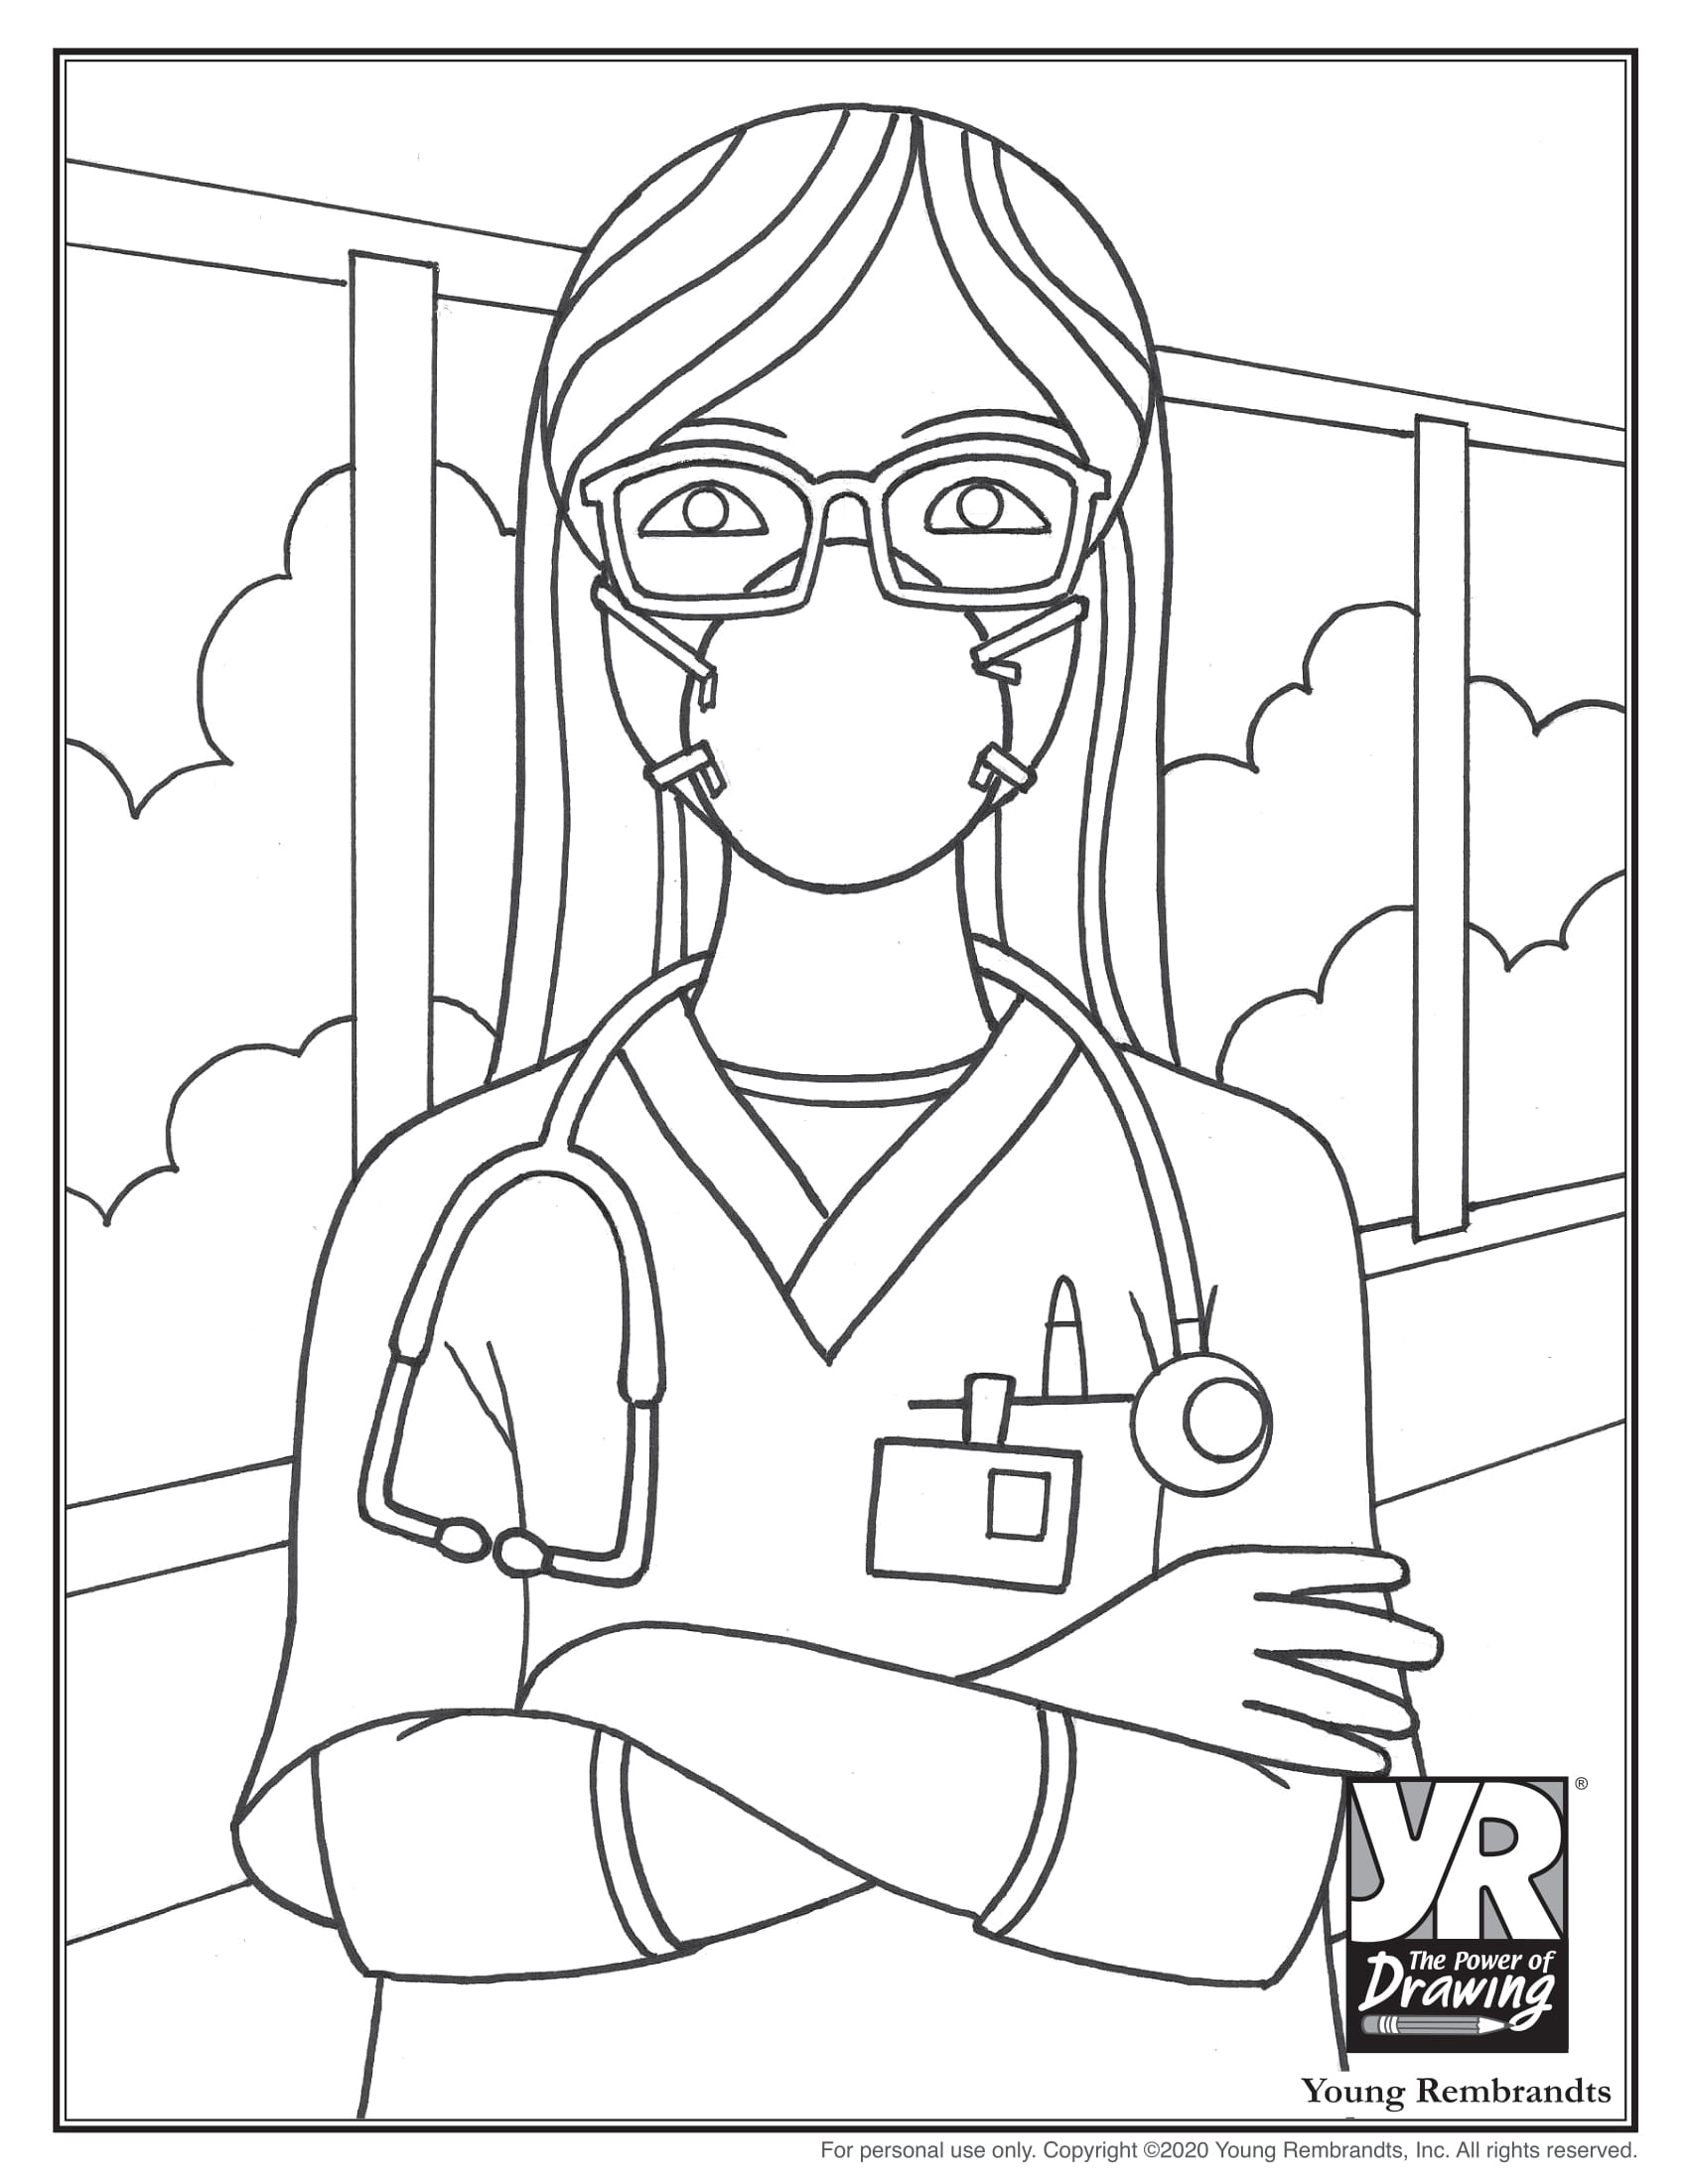 Healthcare worker coloring page